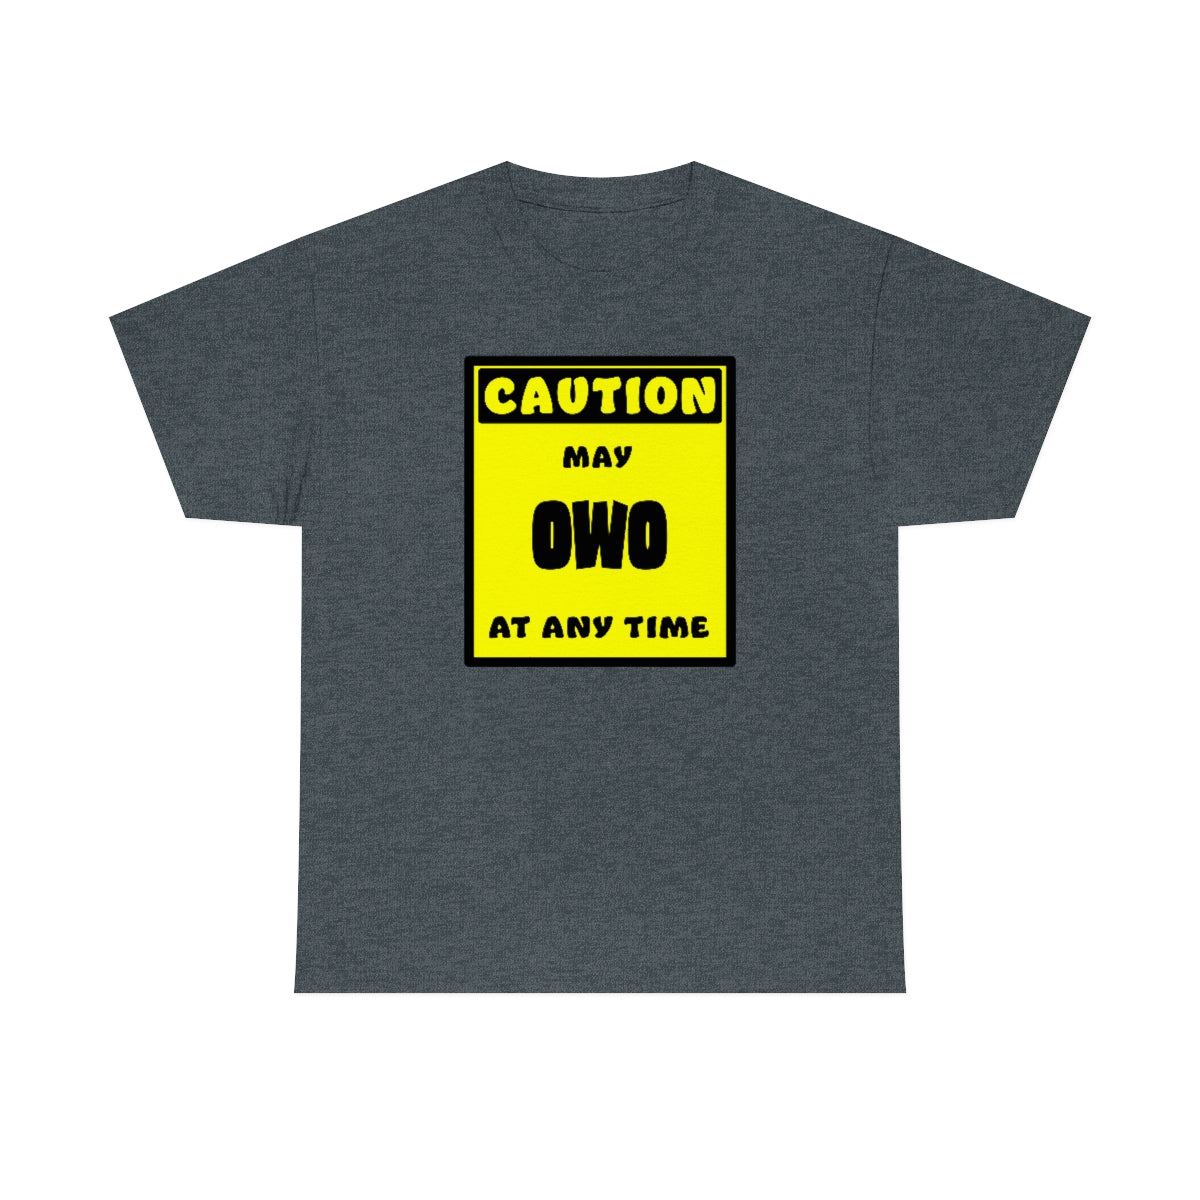 CAUTION! May OWO at any time! - T-Shirt T-Shirt AFLT-Whootorca Dark Heather S 